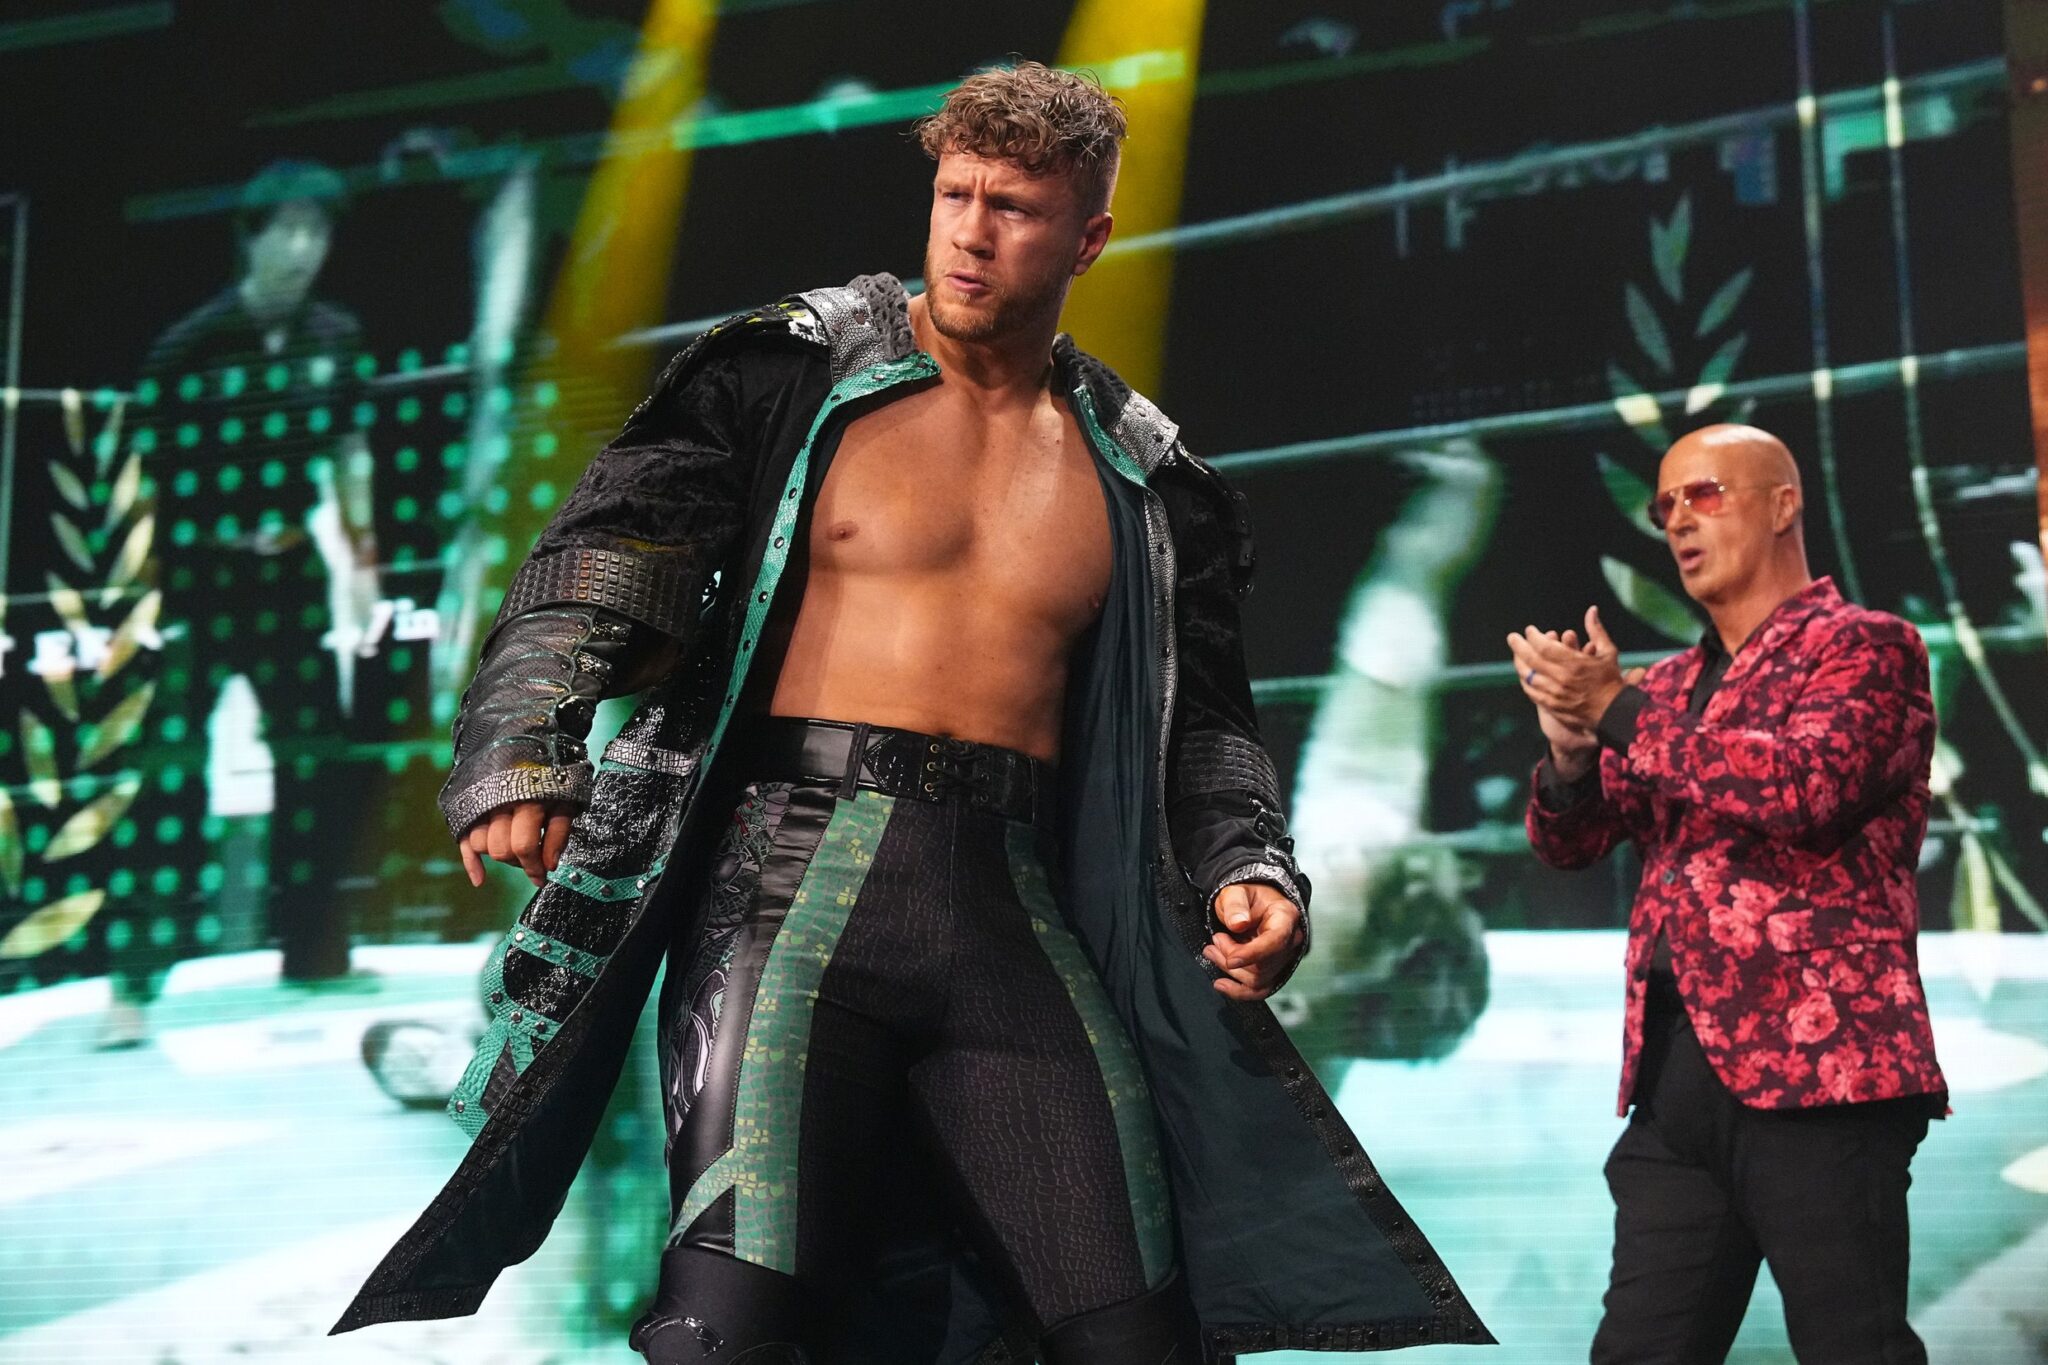 Will Ospreay intends to become ‘Two-Belts Billy’ following the AEW x NJPW: Forbidden Door alliance.